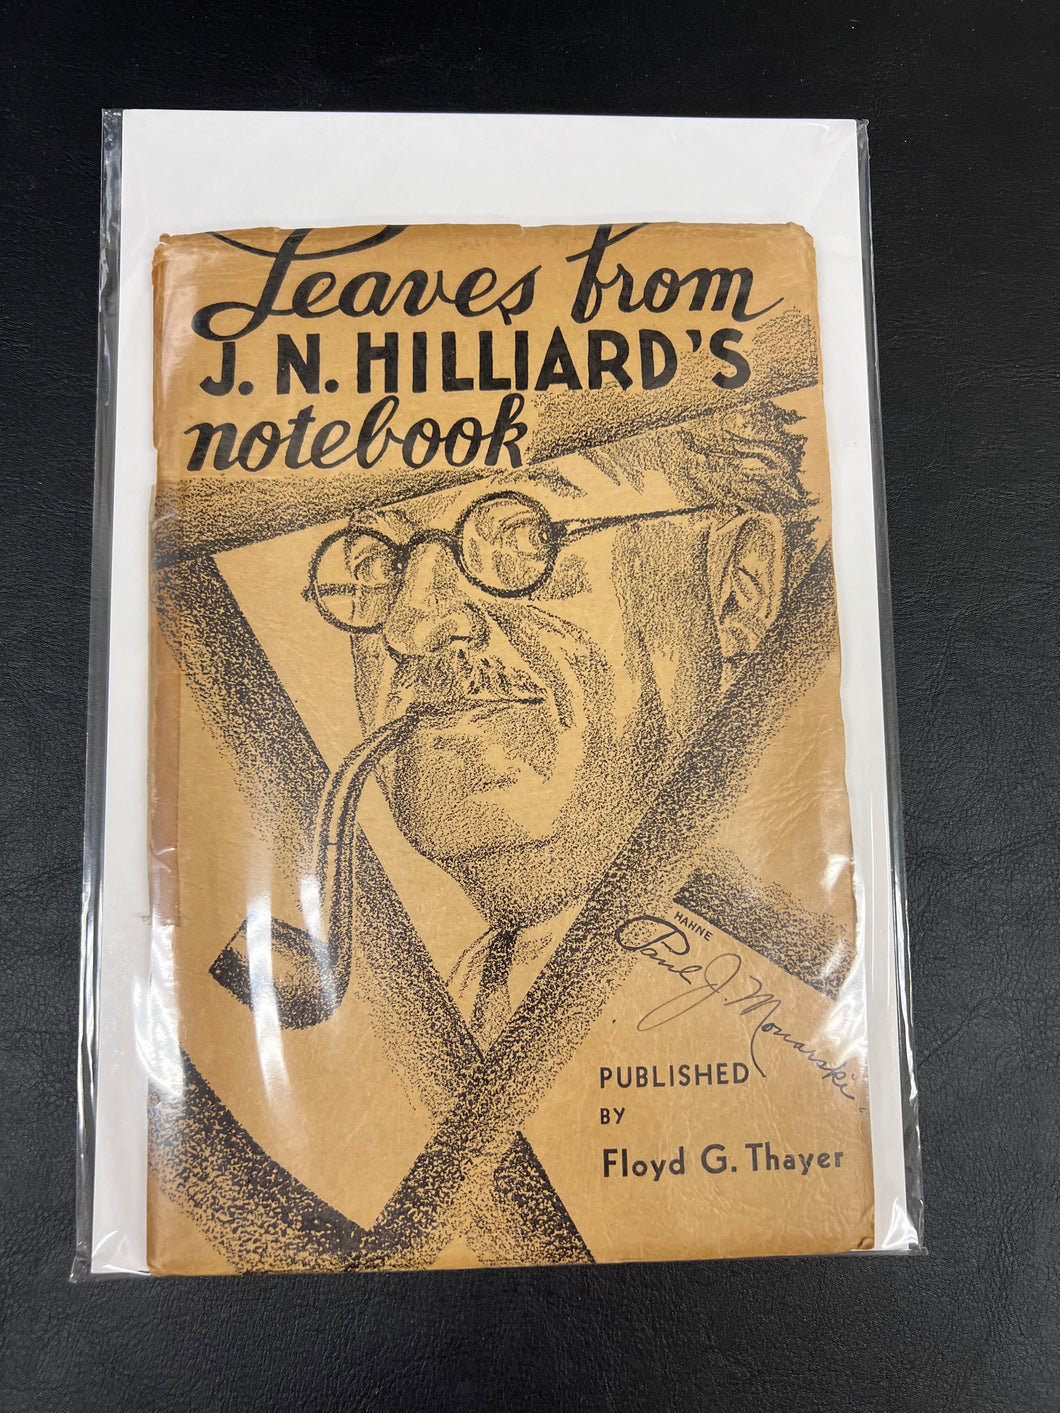 Leave From J.N. Hilliard's Notebook by Floyd G. Thayer